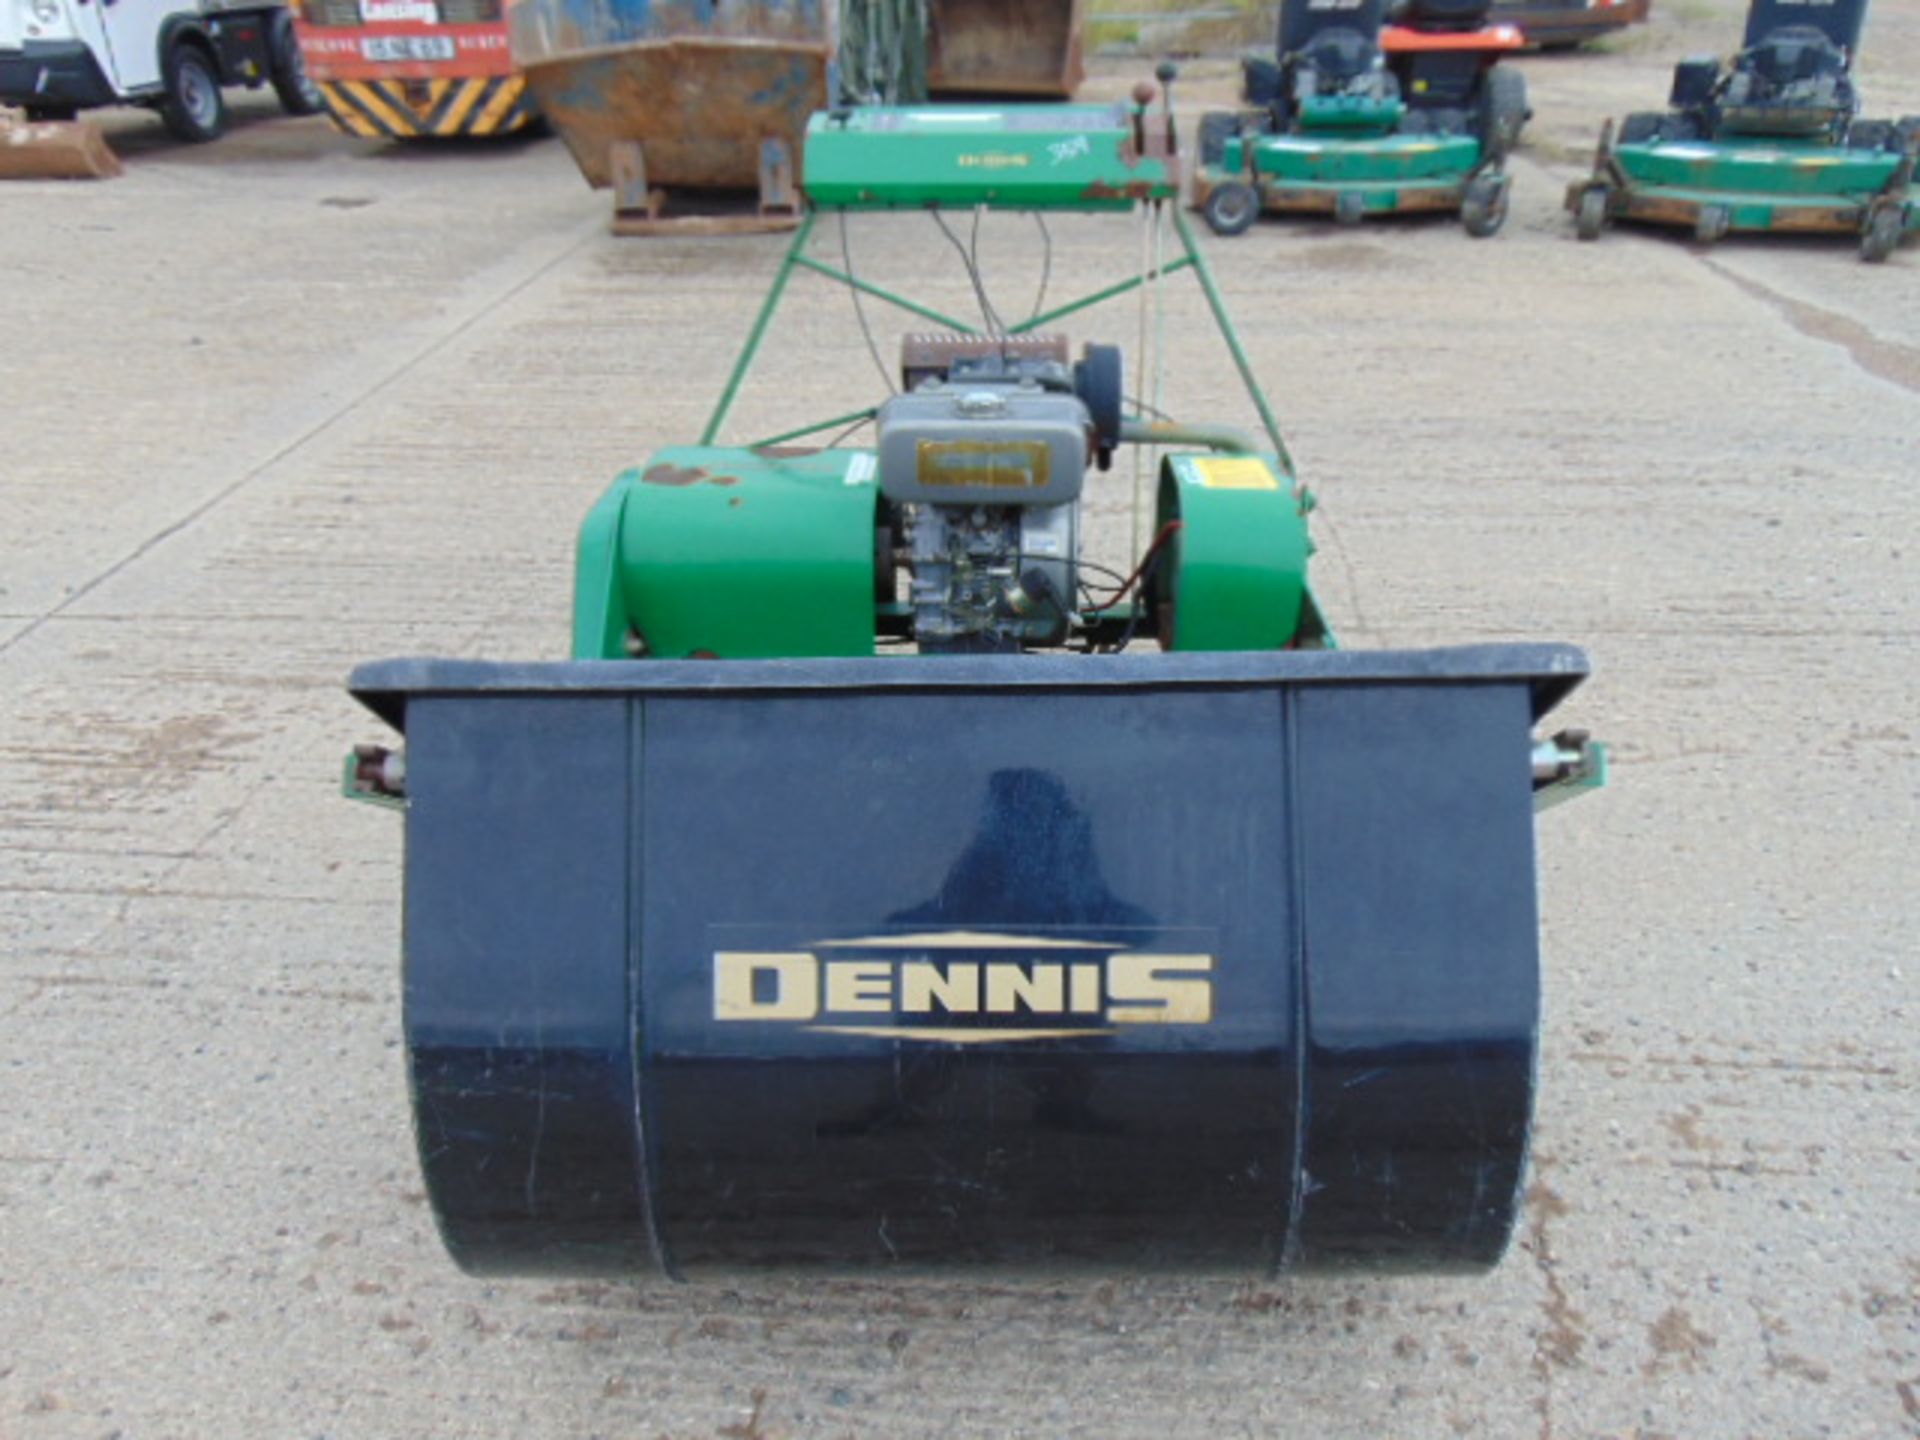 2007 Dennis 36" Cylinder Mower Kubota Diesel Engine county council owned - Image 2 of 13